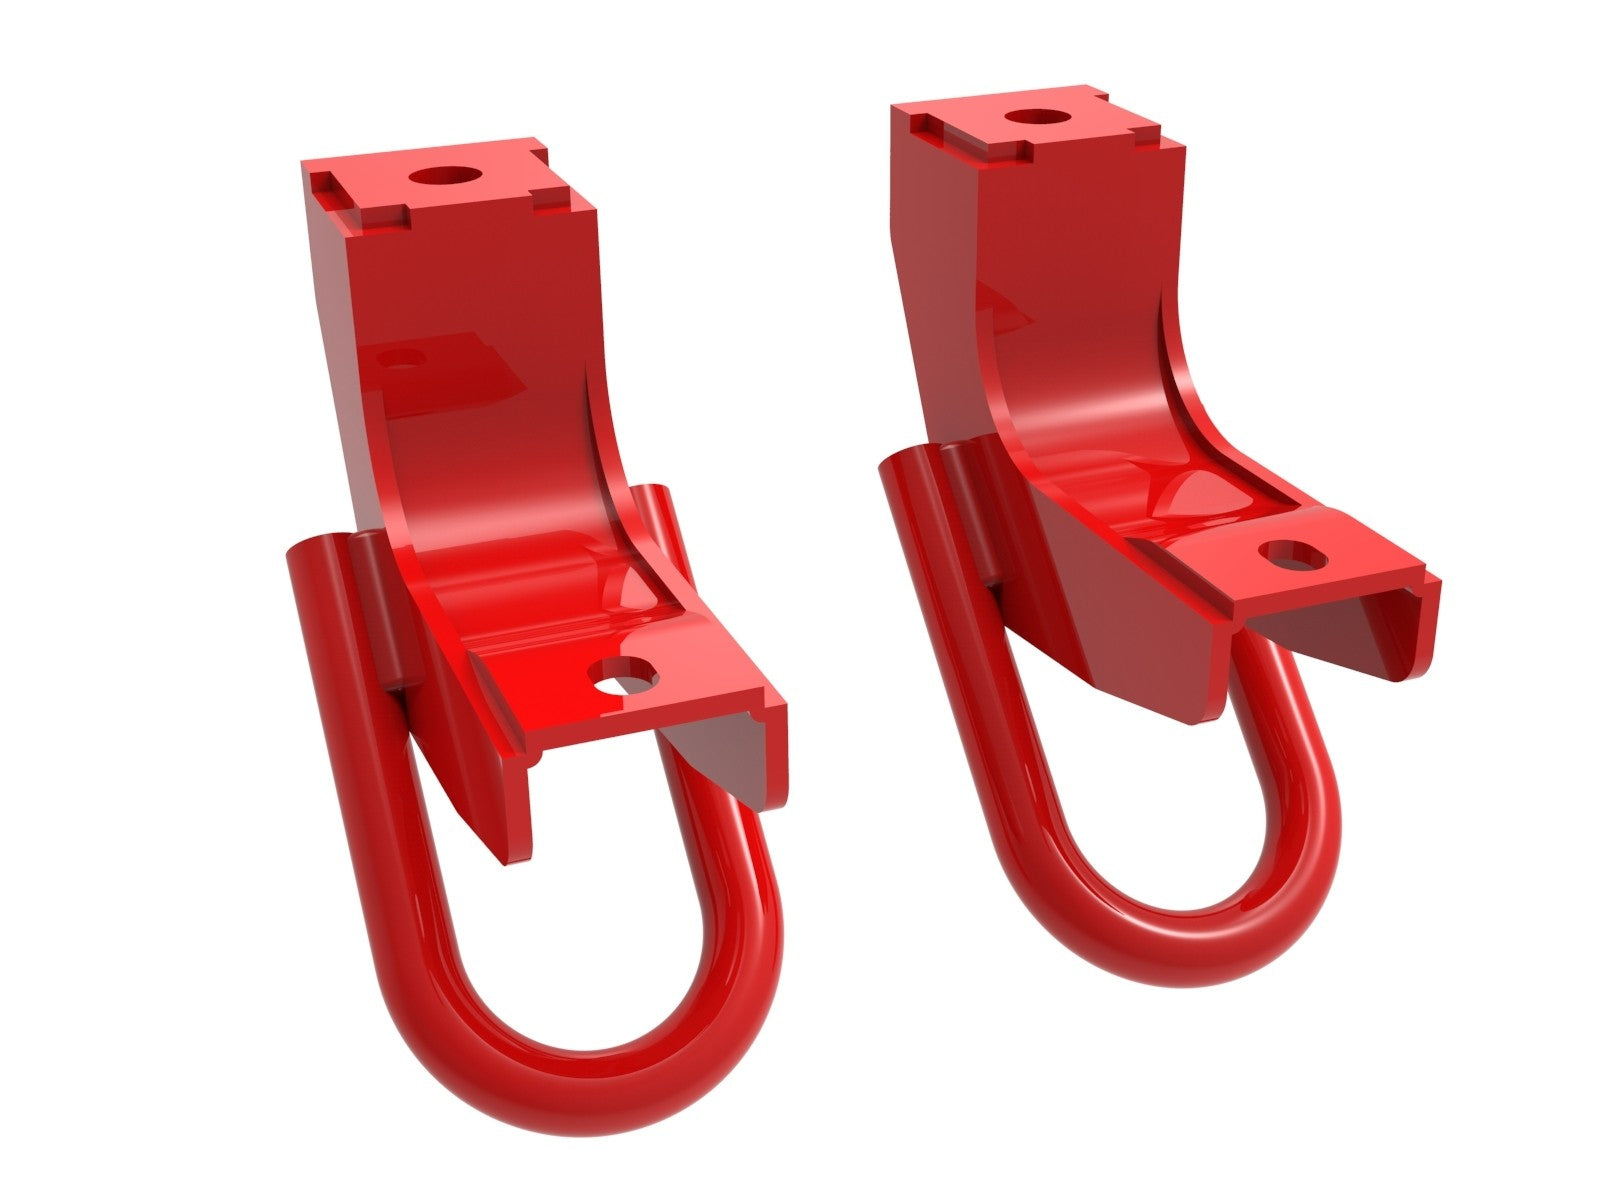 '22-23 Toyota Tundra aFe Control Red Front Tow Hooks display